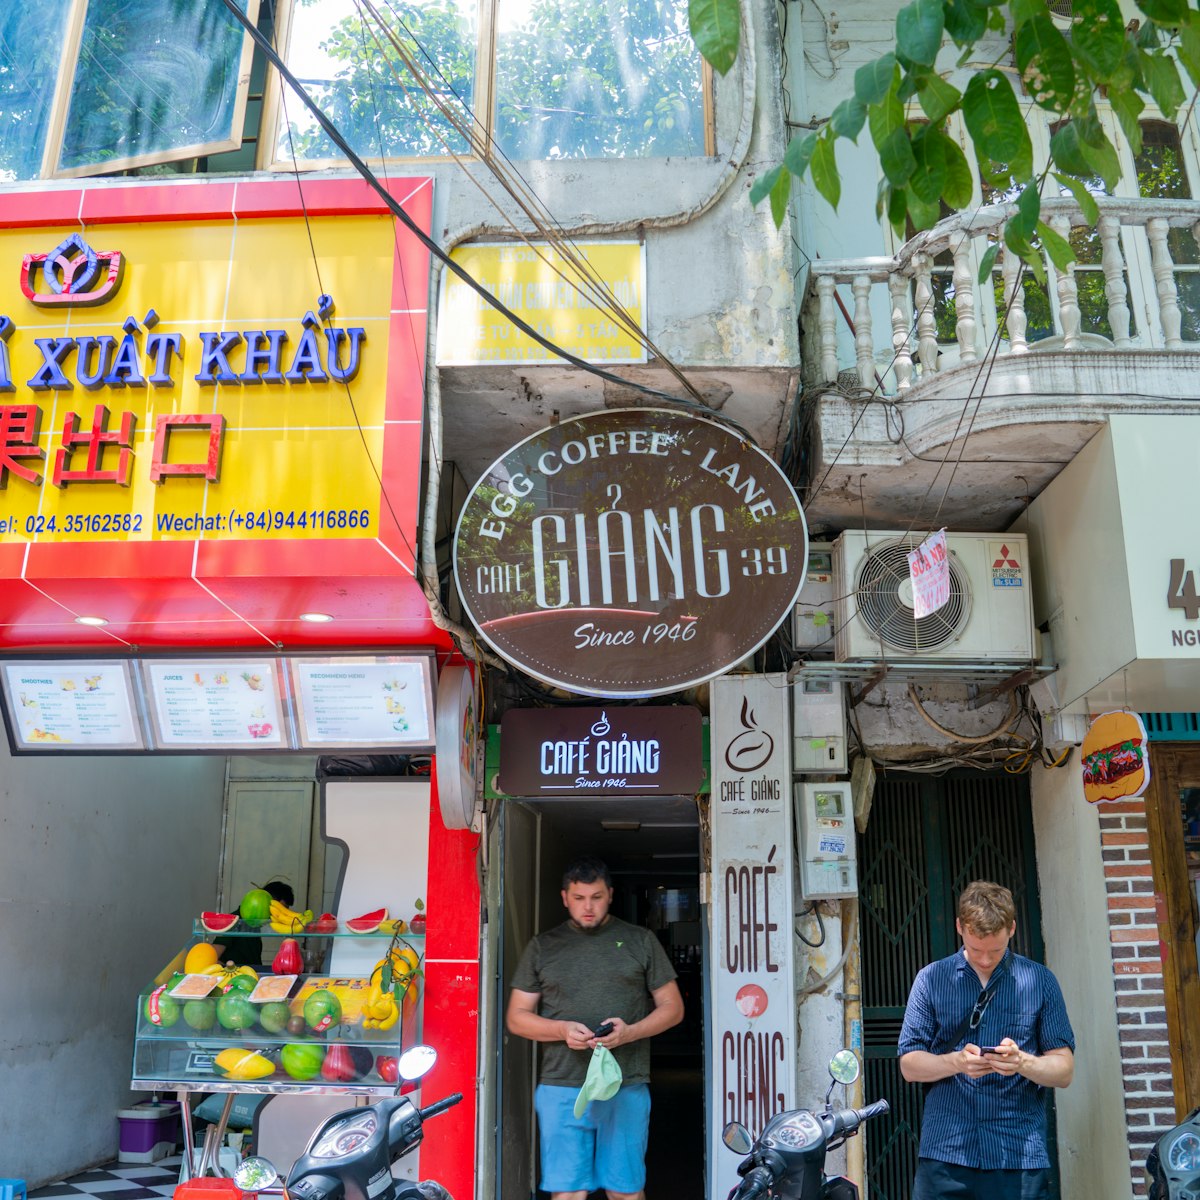 Restaurant name tag Egg Coffee Cafe Trung Local Coffee shop dessert CAFE GIANG in OLD QUARTER CITY.

